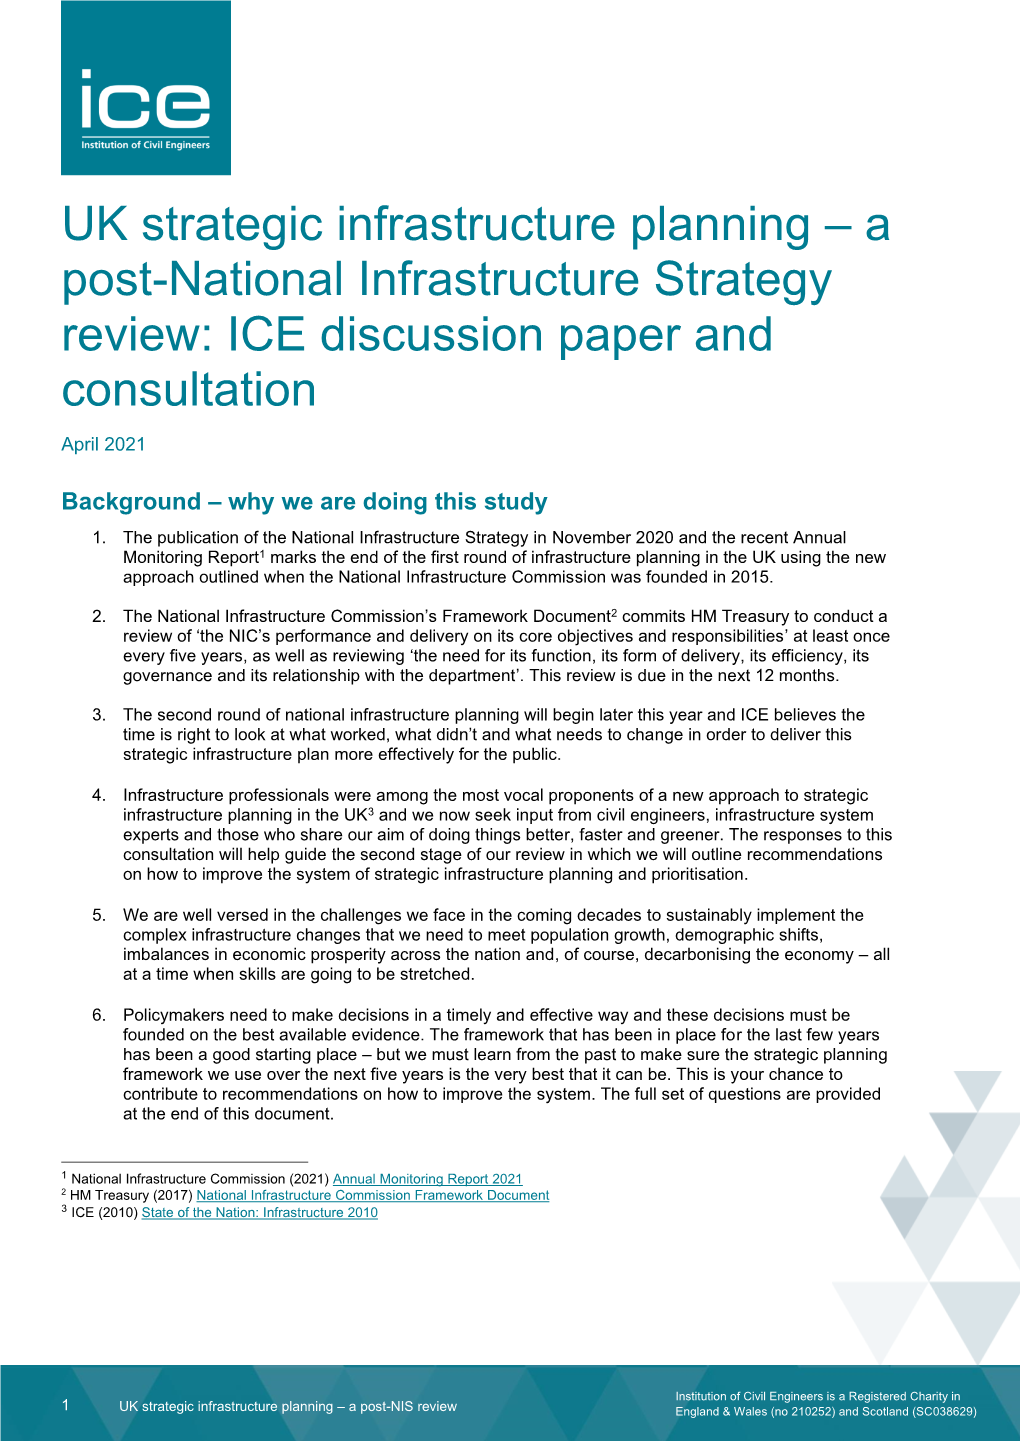 UK Strategic Infrastructure Planning – a Post-National Infrastructure Strategy Review: ICE Discussion Paper and Consultation